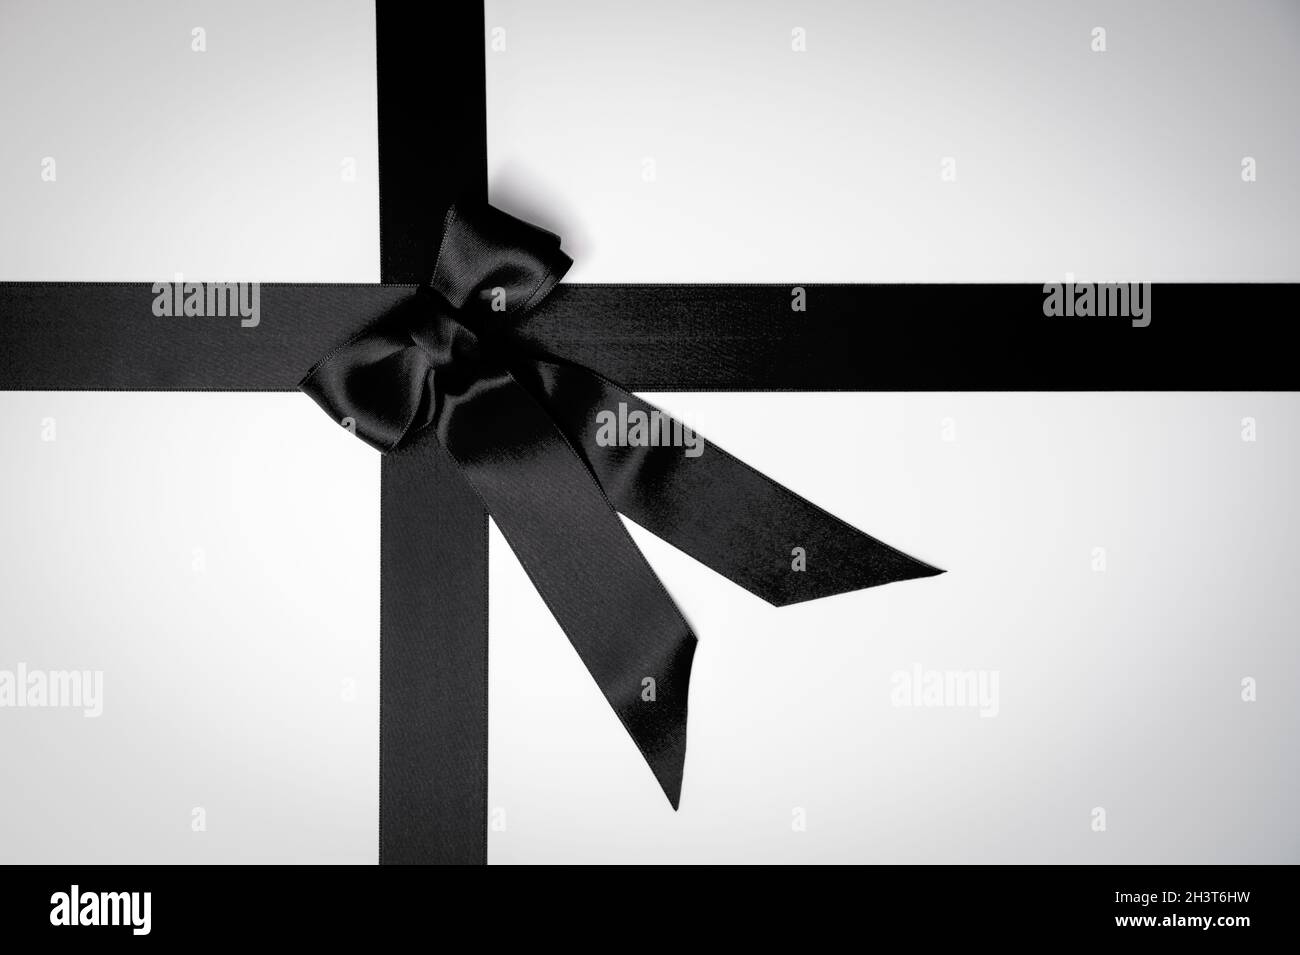 Black Friday or mourning concept with black tied ribbon bow Stock Photo